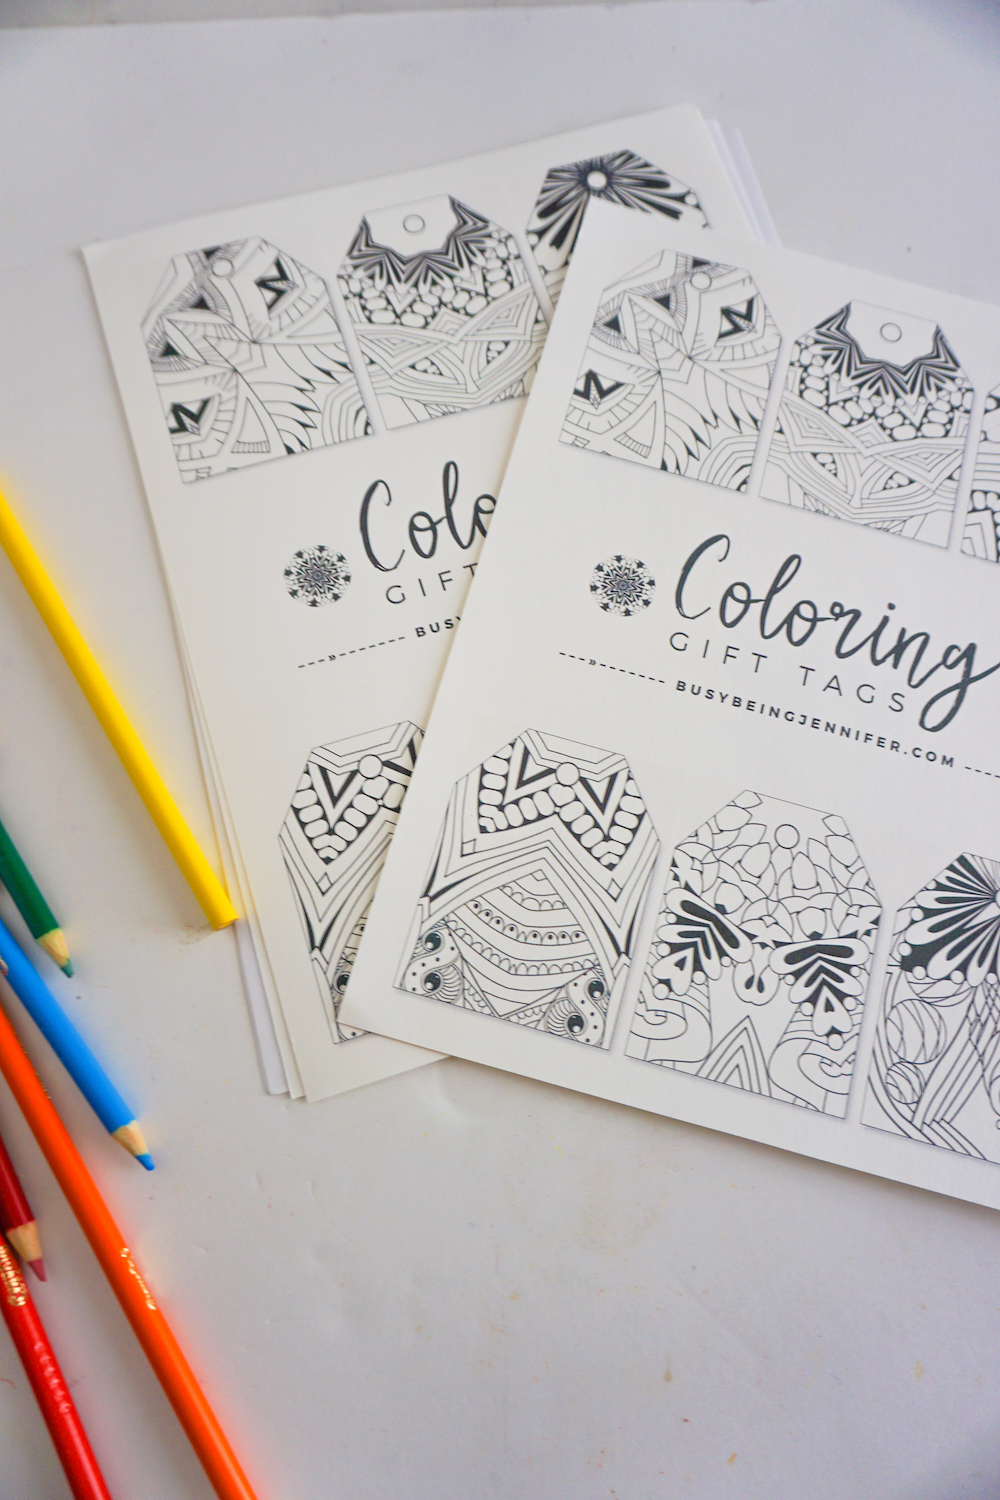 I needed a gift tag for a present for a friend. So I made this fun Adult Coloring Gift Tags Free Printable set so I could color my own!